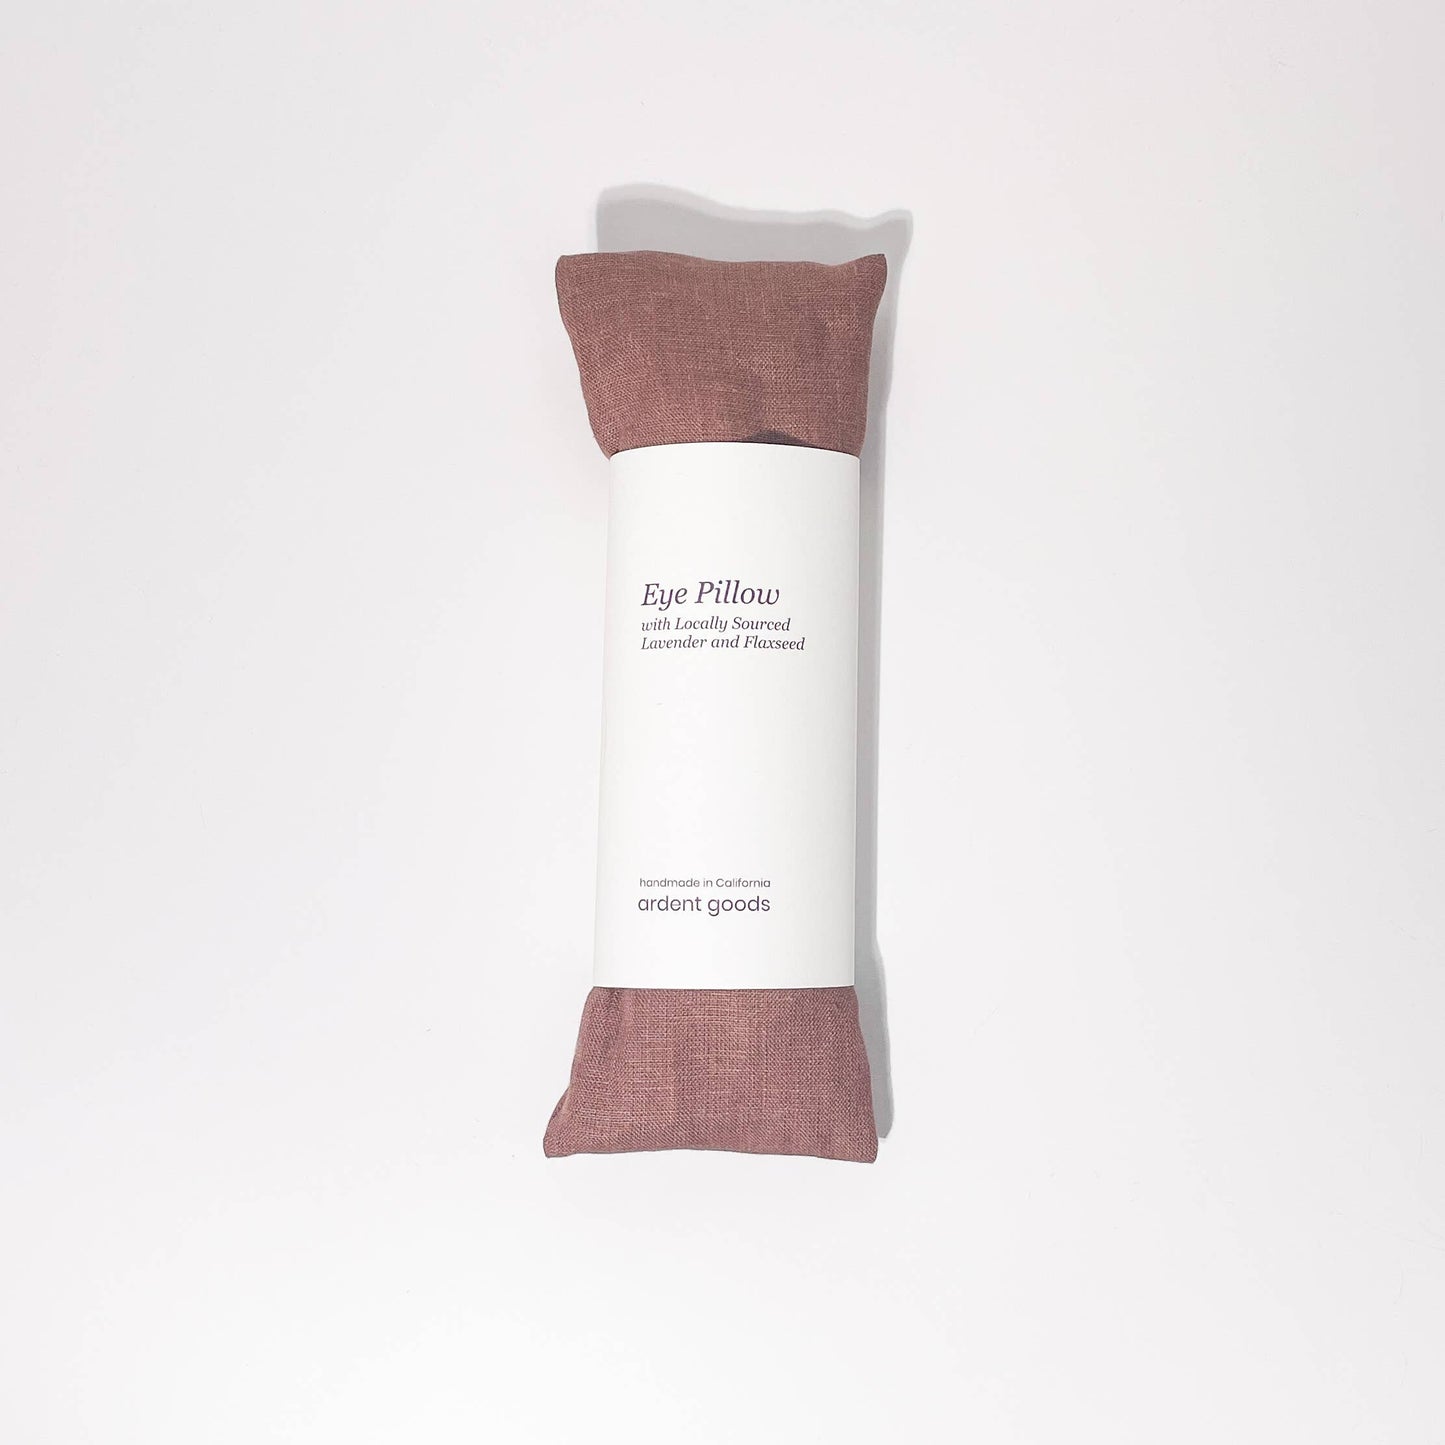 Eye Pillow Spa Therapy with Lavender -multiple colorways: Oatmeal